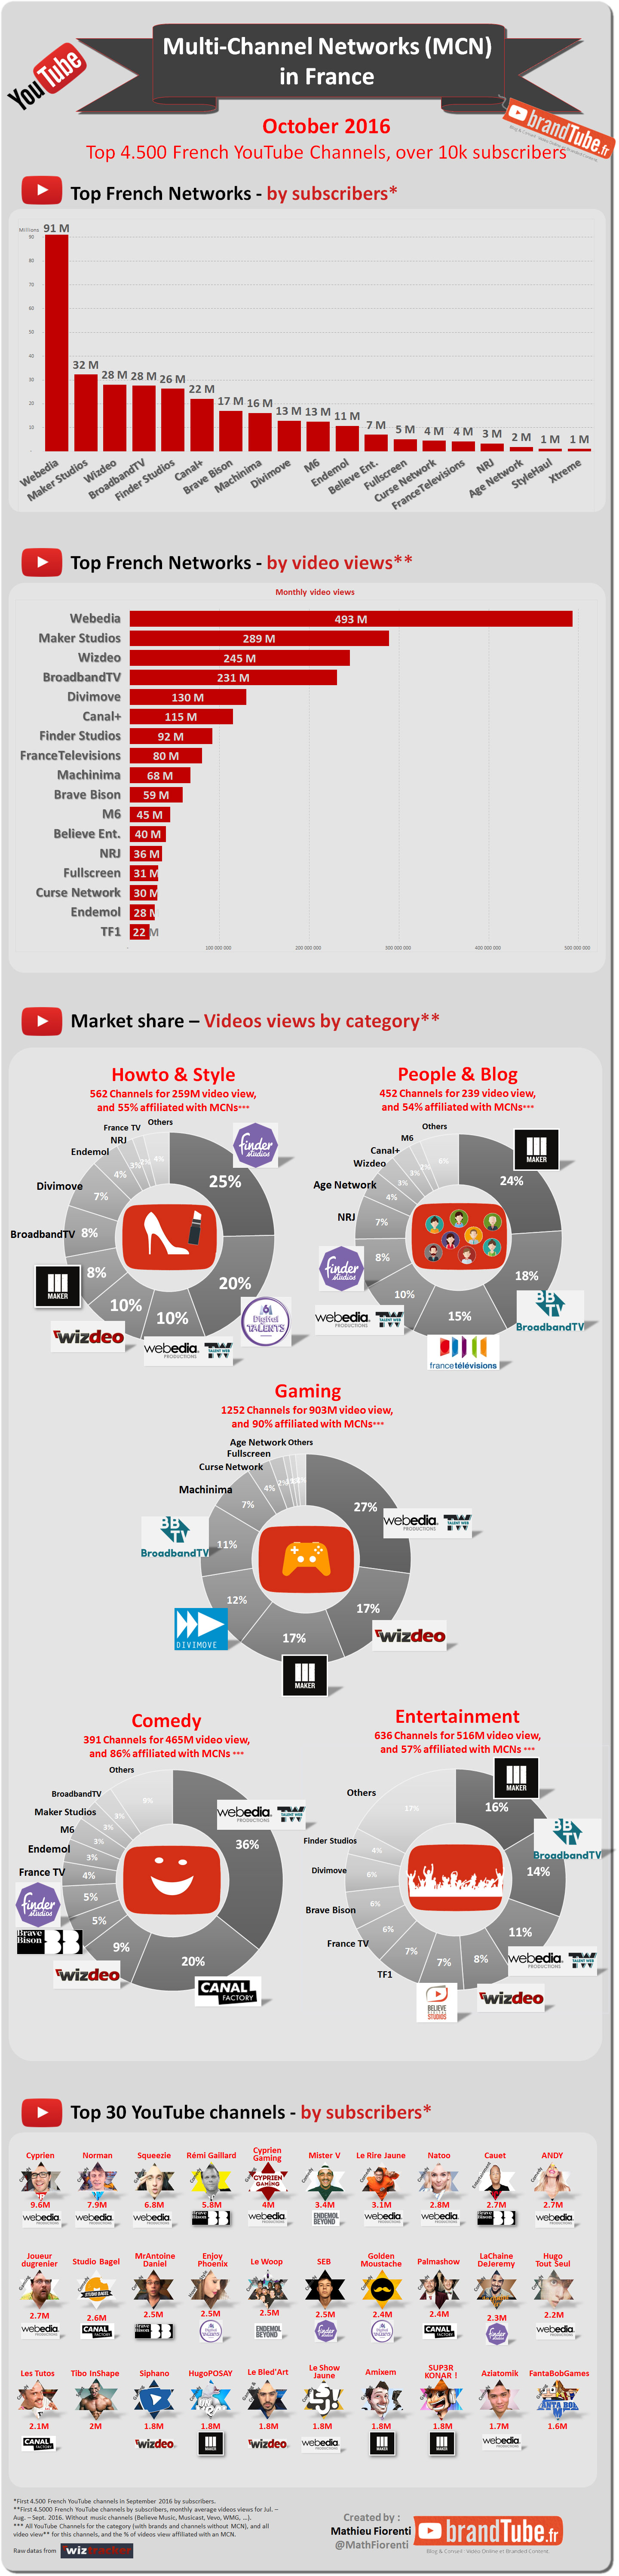 youtube-multi-channel-networks-mcn-french-ranking